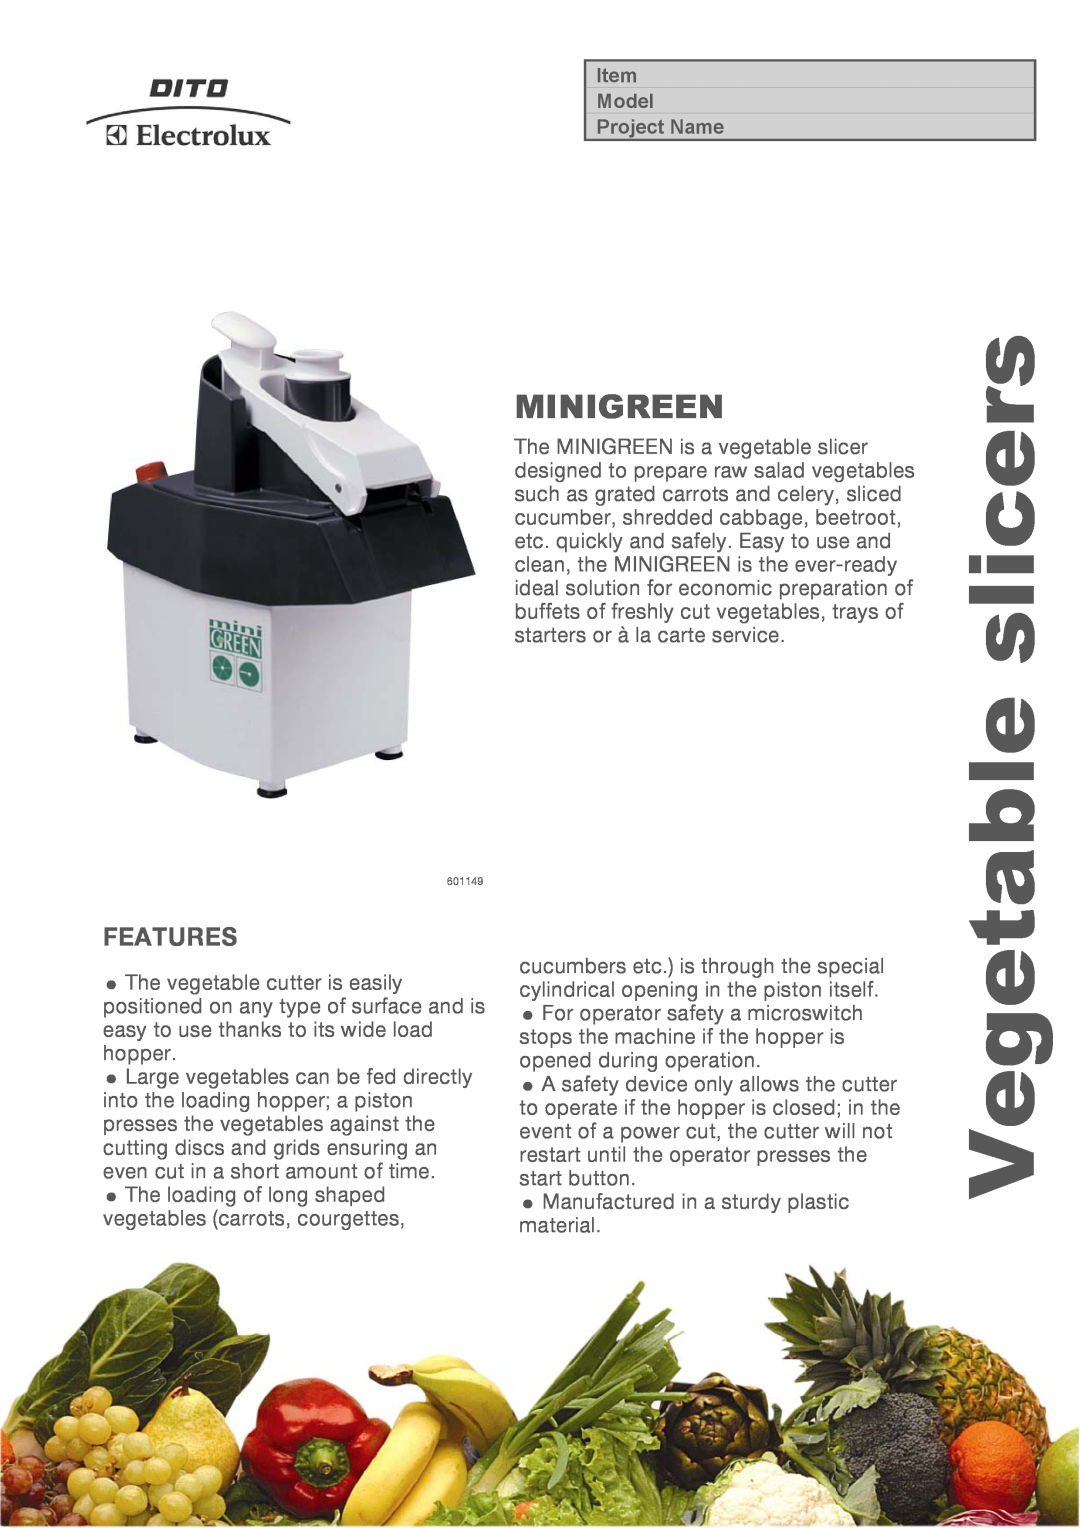 Electrolux MIG4, 601181, 601149 manual slicers, Features, Vegetable, Minigreen 